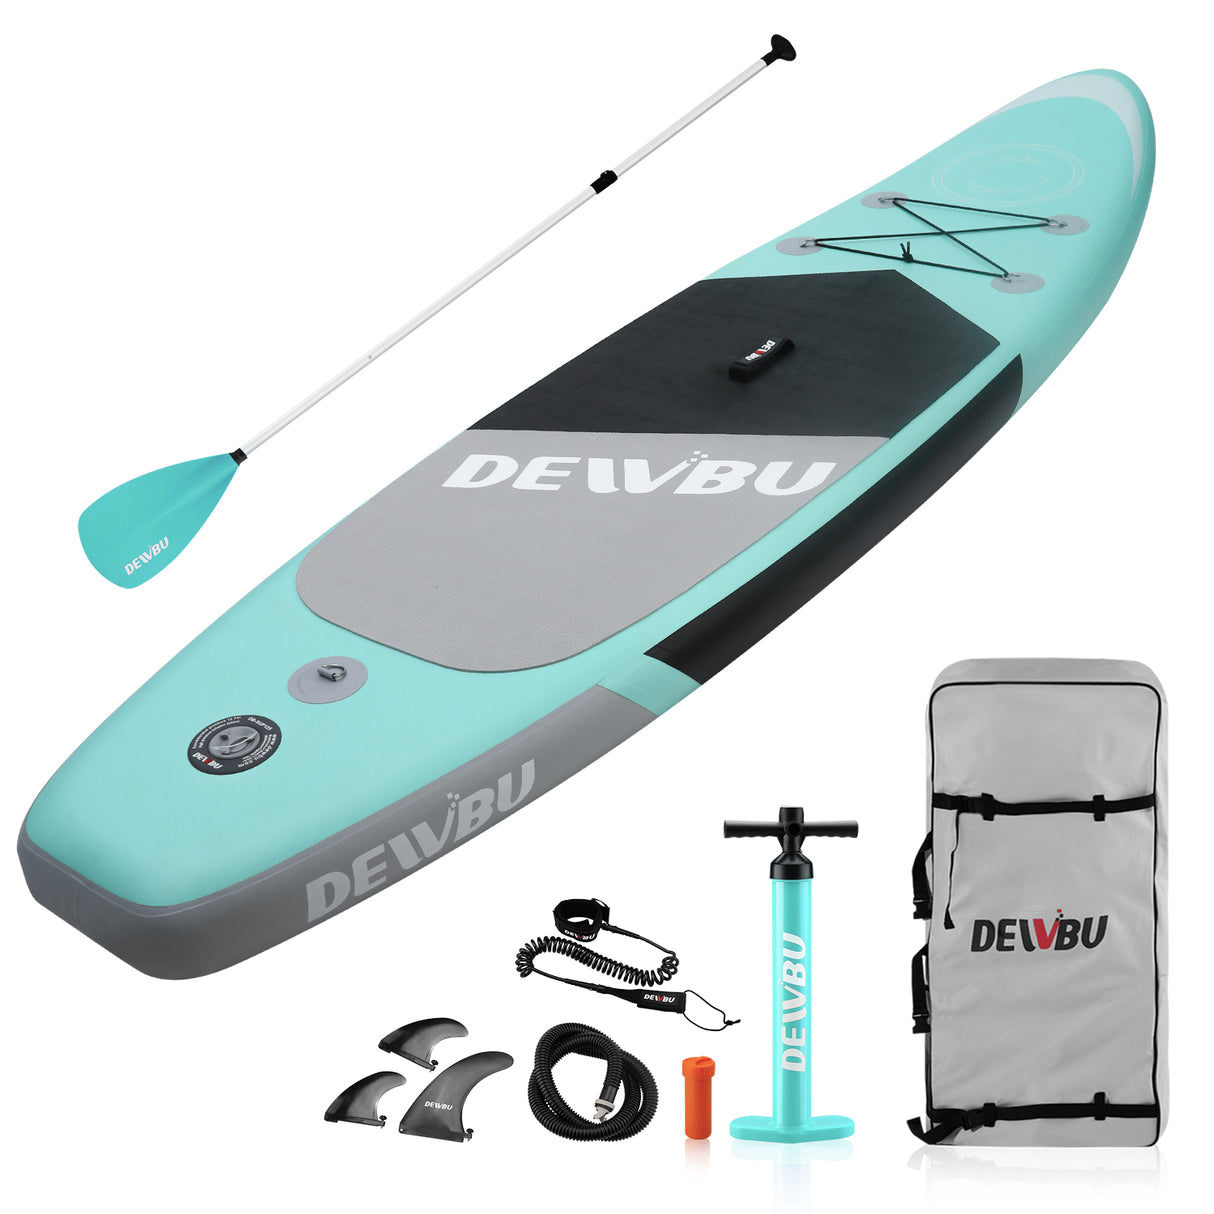 DEWBU Inflatable Stand Up Paddle Board with Paddle Surfboards-Green